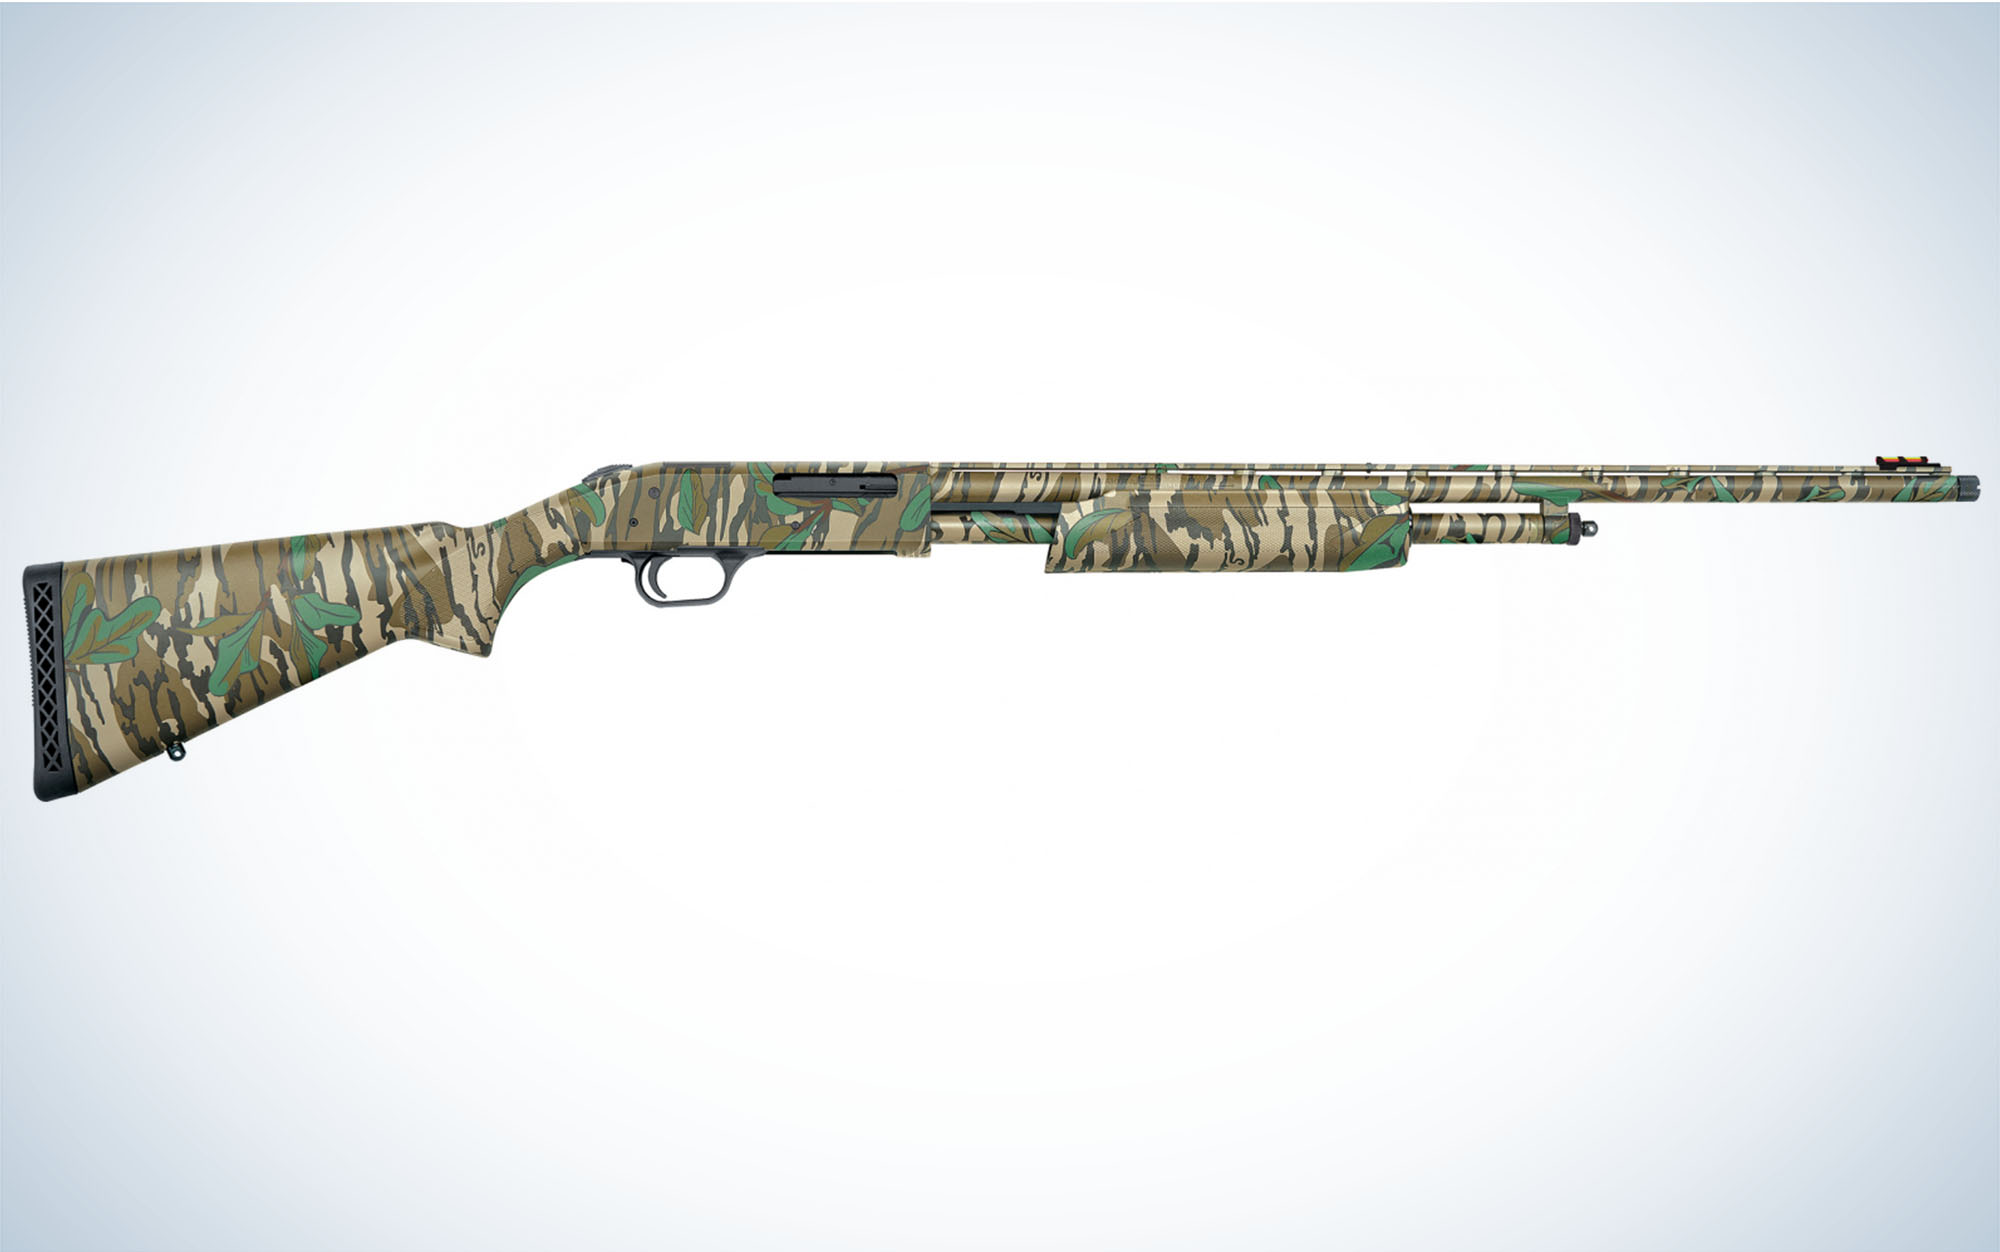 The Mossberg 500 is one of the best .410 shotguns.